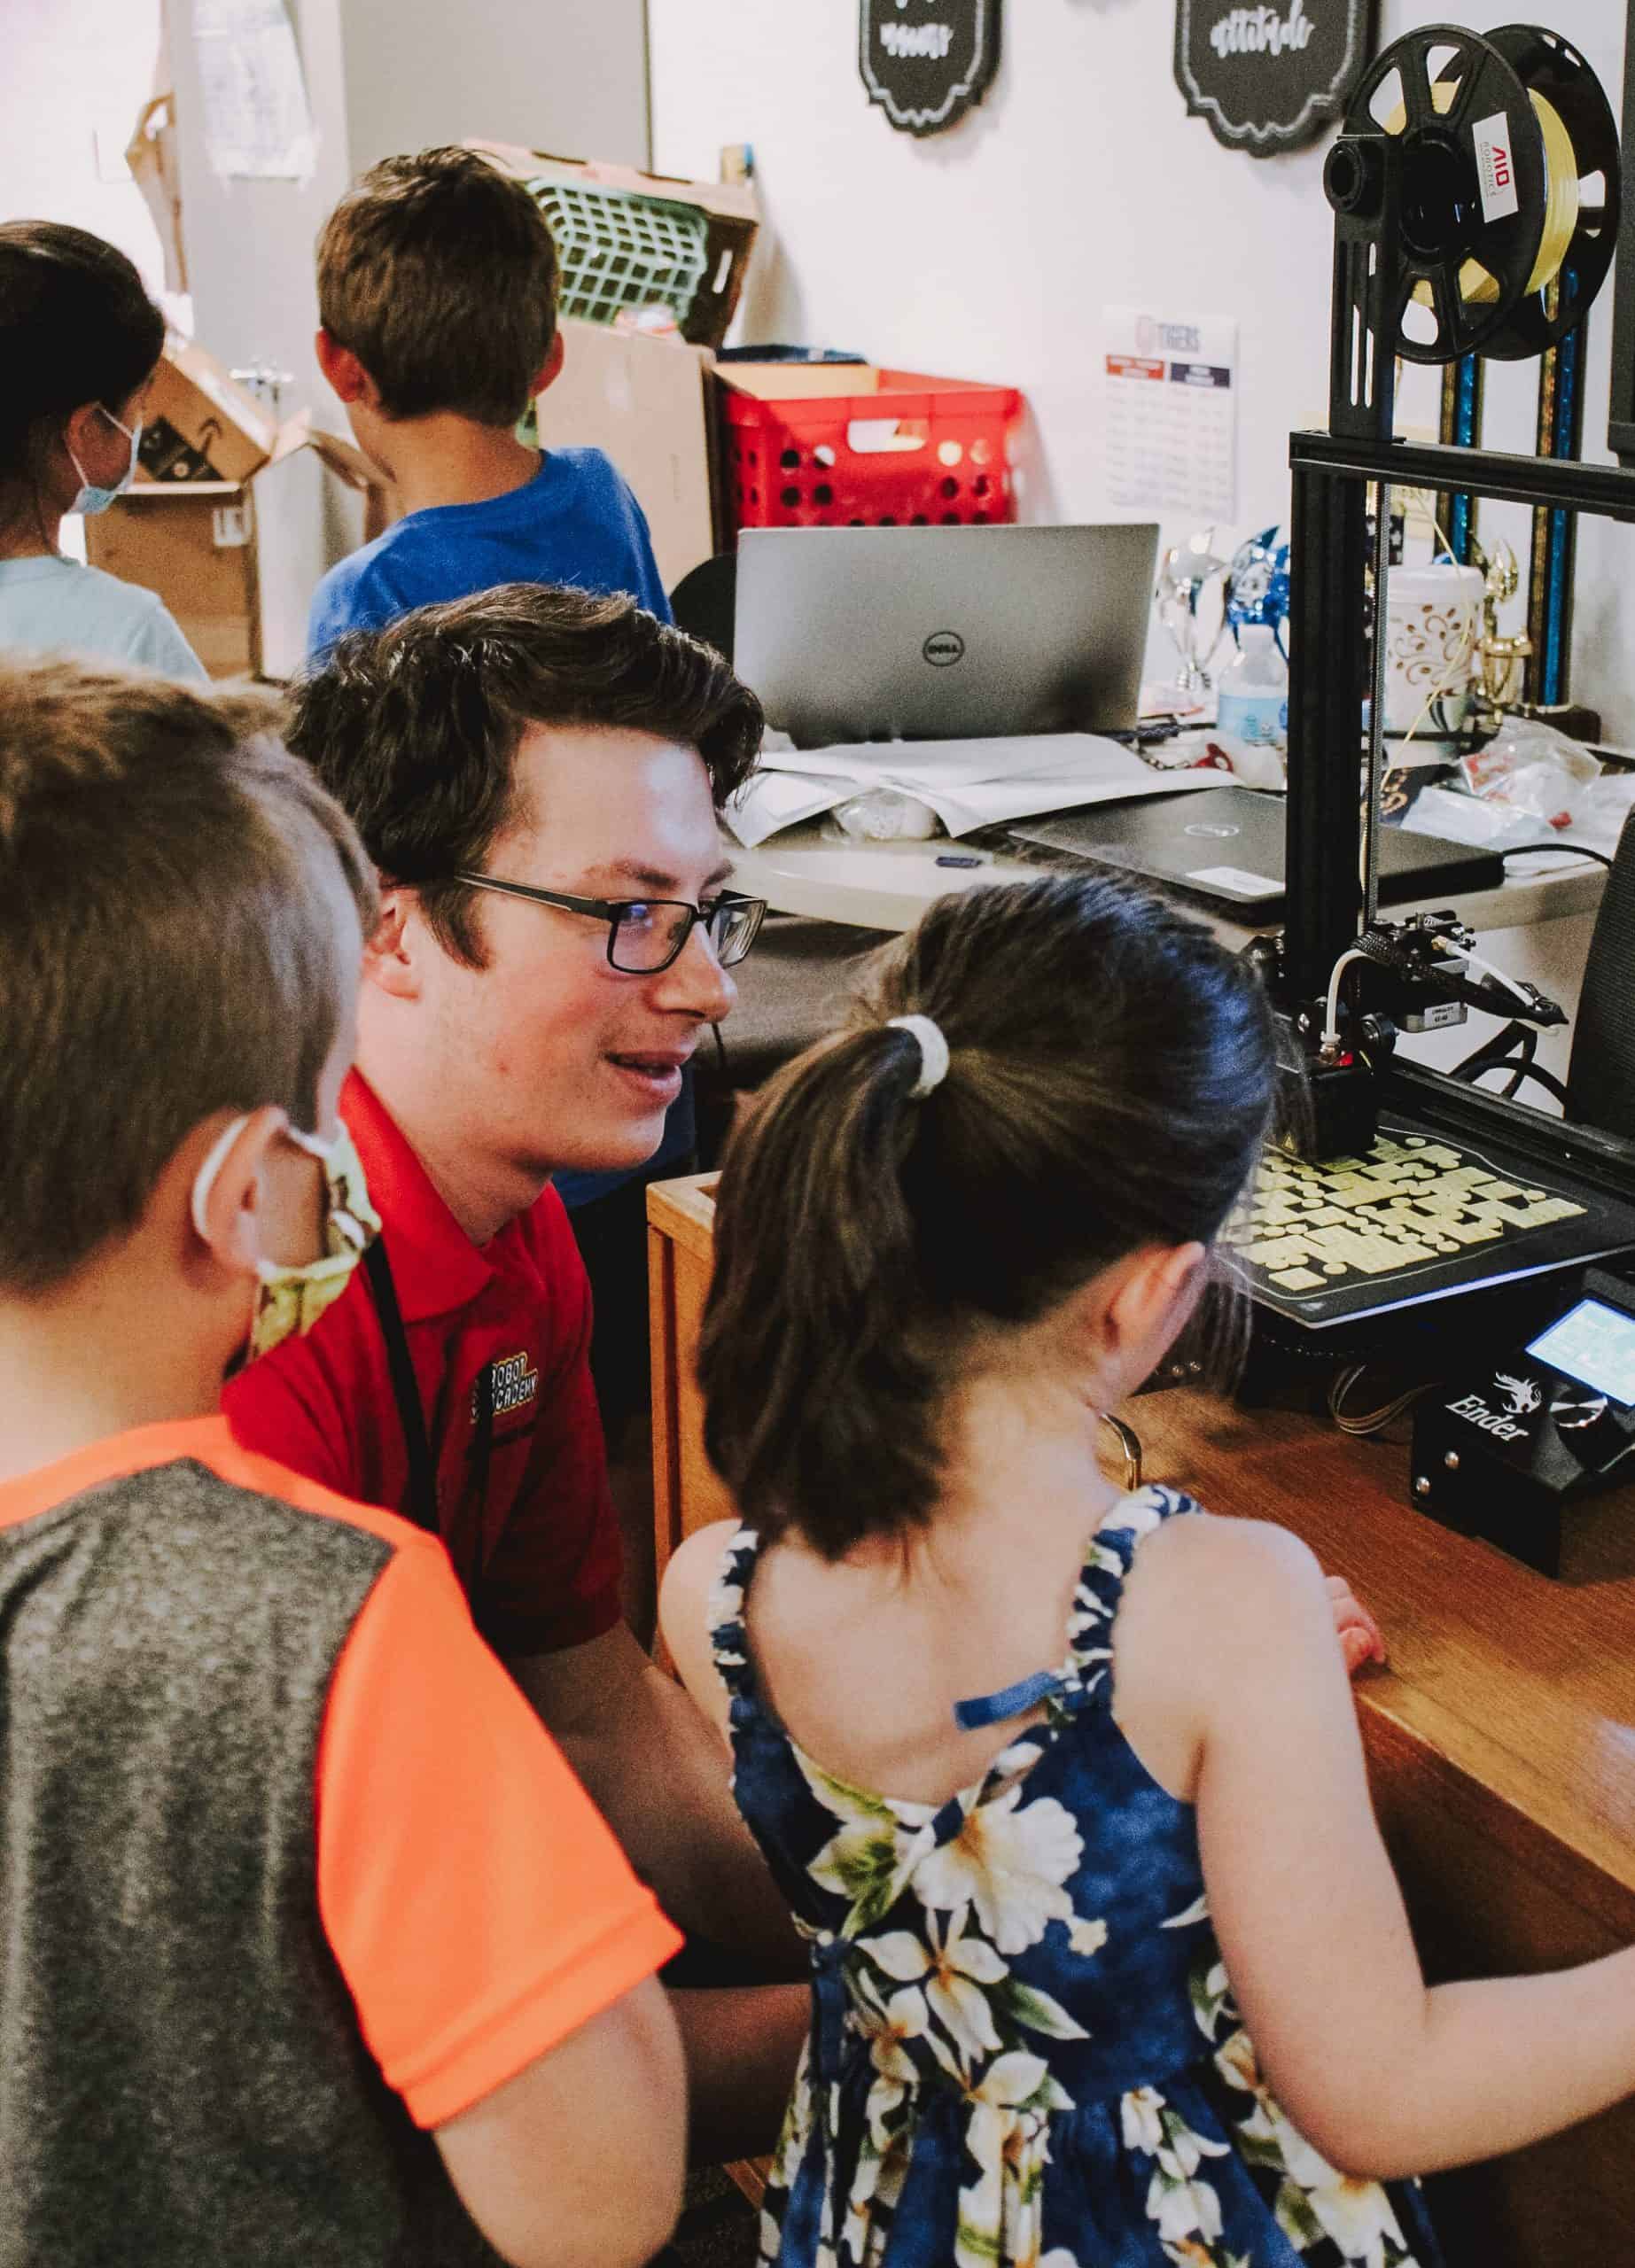 You are currently viewing Jr. LEGO® Robotics & 3D Printing Camp for ages 5 to 8 | Morning | 5 Days: July 24-28, 2023 | 9:30 am to 12:30 pm | Powell